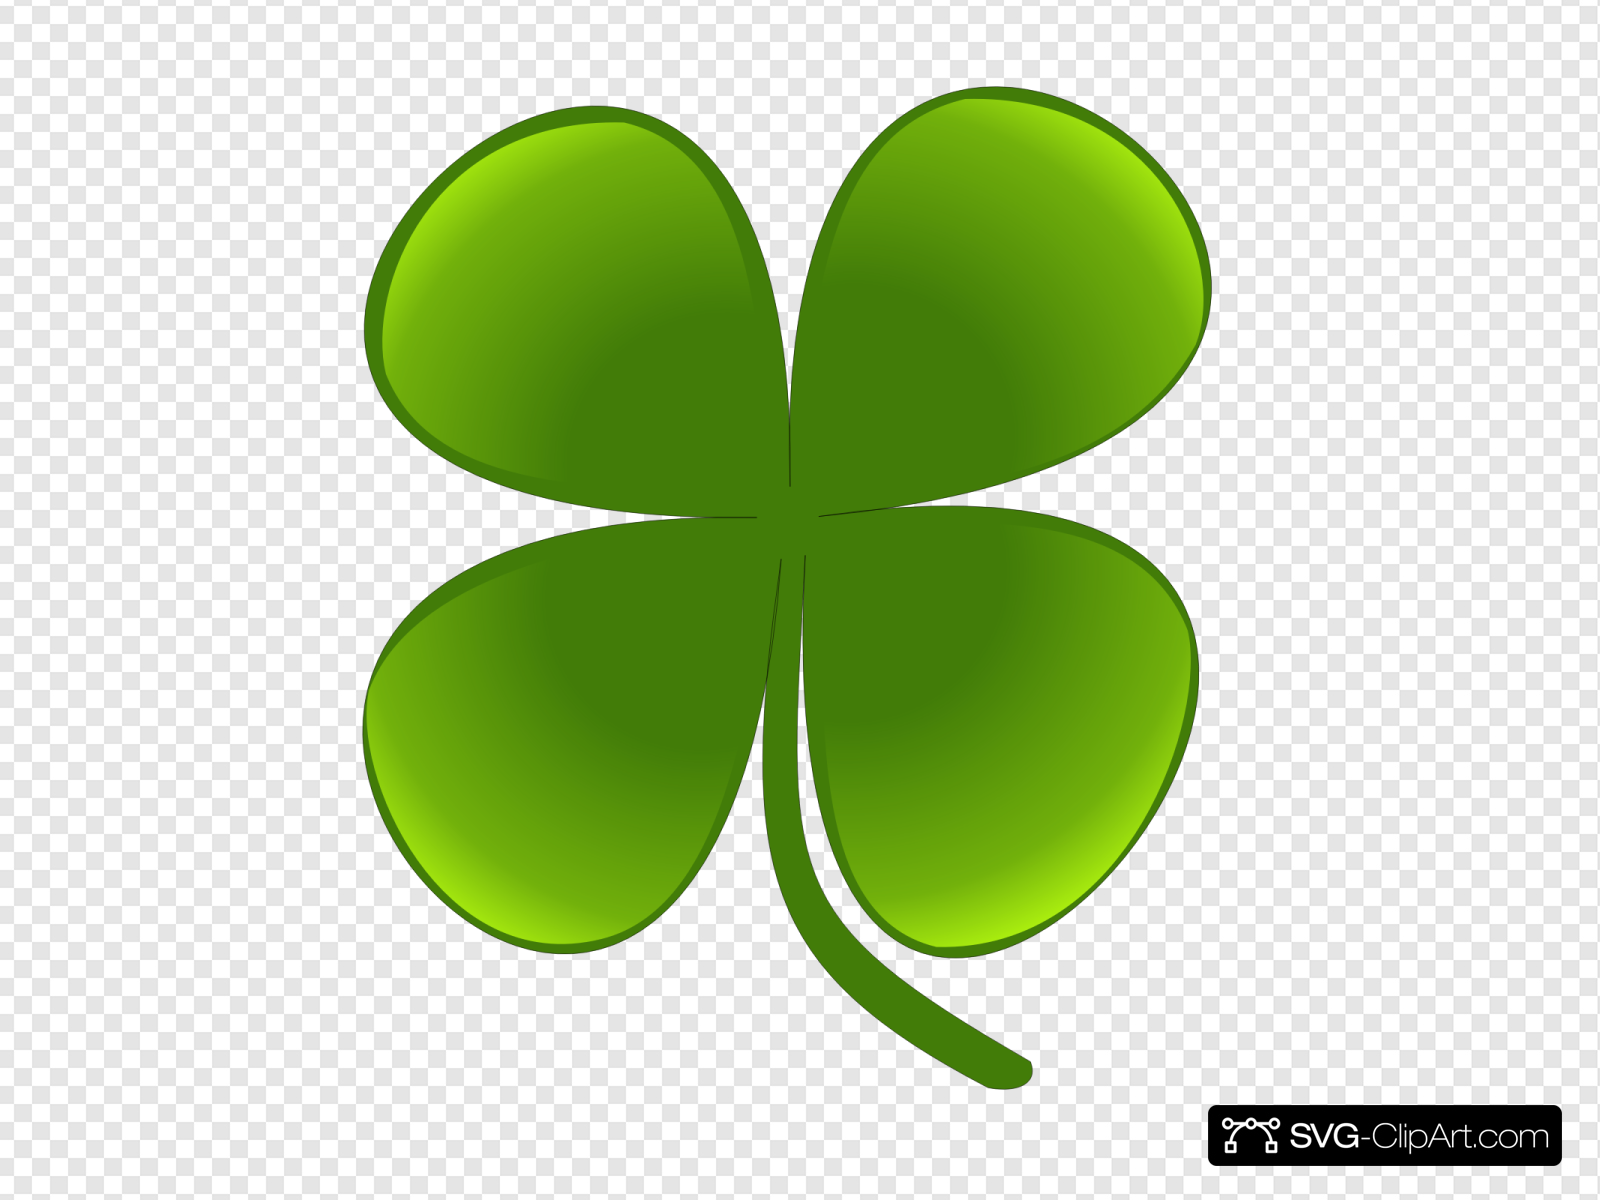 Shamrock For March Clip art, Icon and SVG